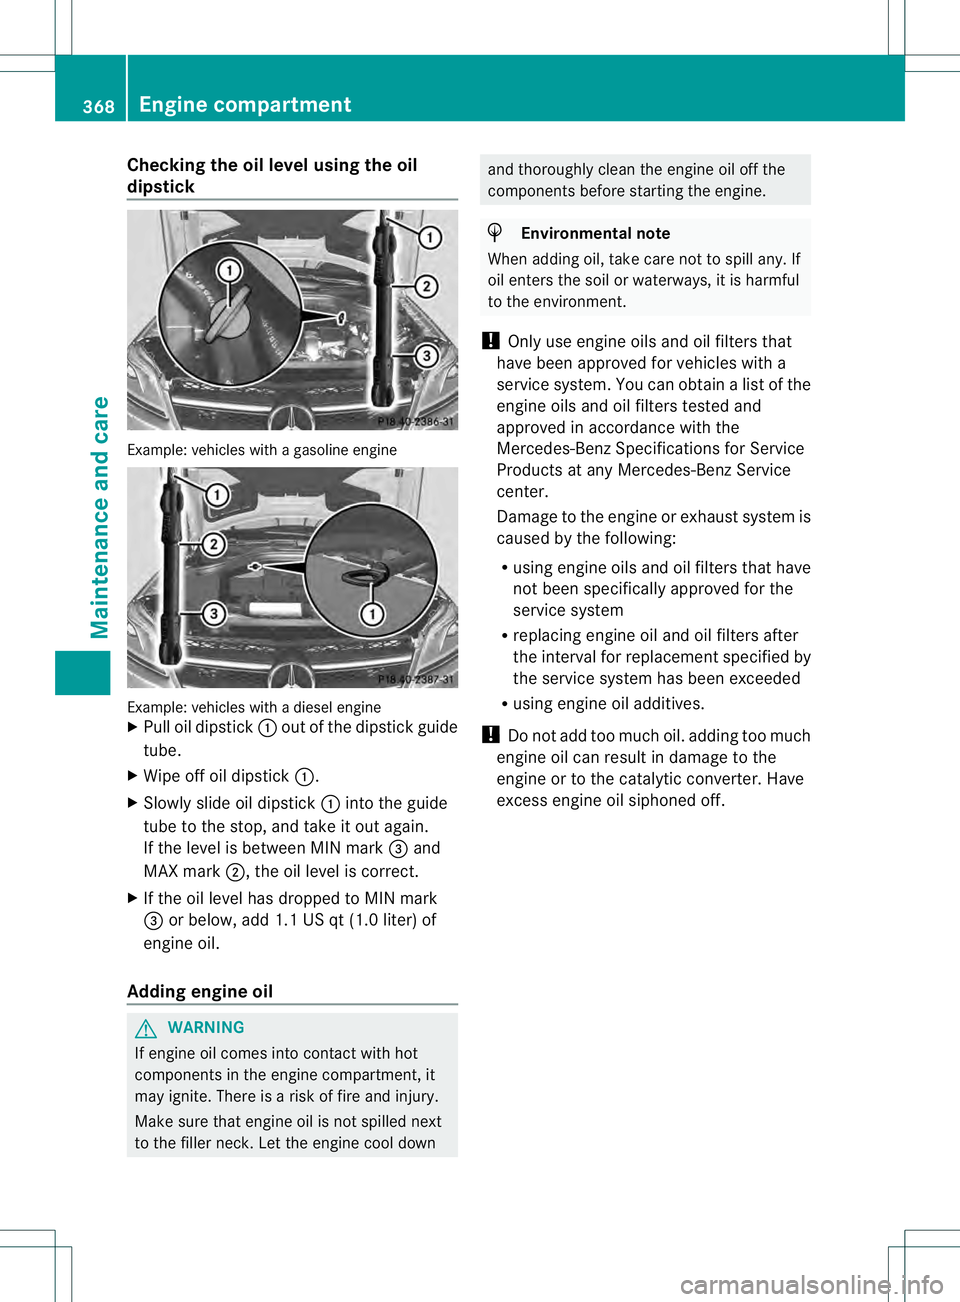 MERCEDES-BENZ GL 2013  Owners Manual Checking the oil level using the oil
dipstick
Example
:vehicles with a gasoline engine Example: vehicles with a diesel engine
X Pull oil dipstick 0002out of the dipstick guide
tube.
X Wipe off oil dip